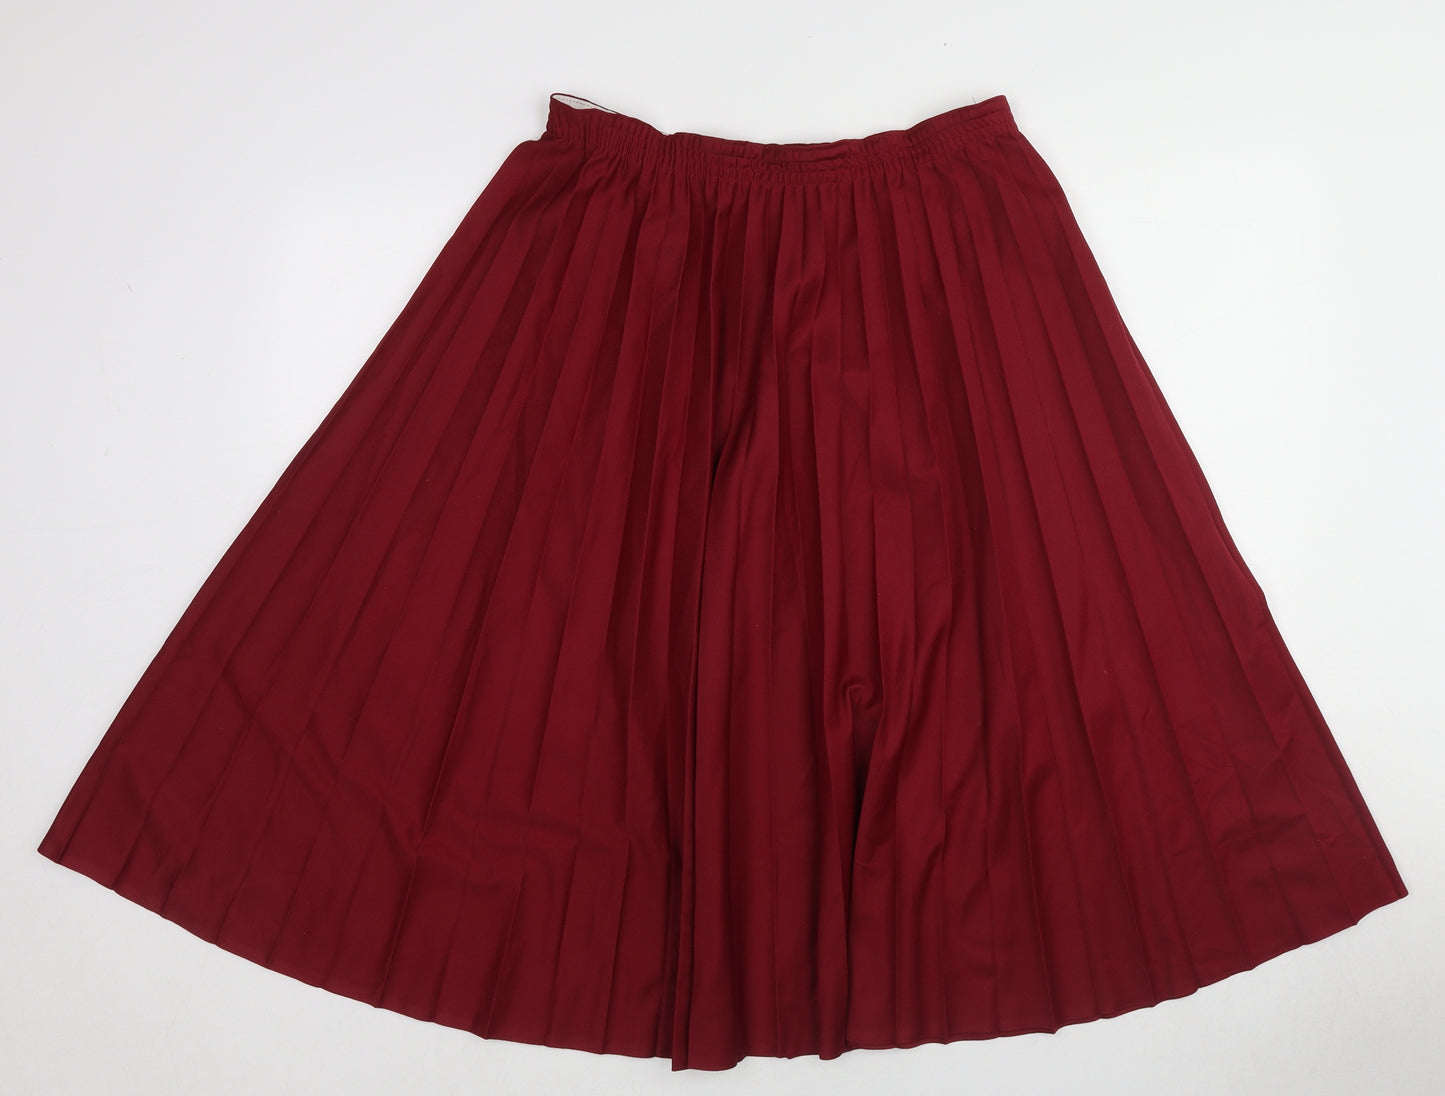 Slimma Womens Red Polyester Pleated Skirt Size 16